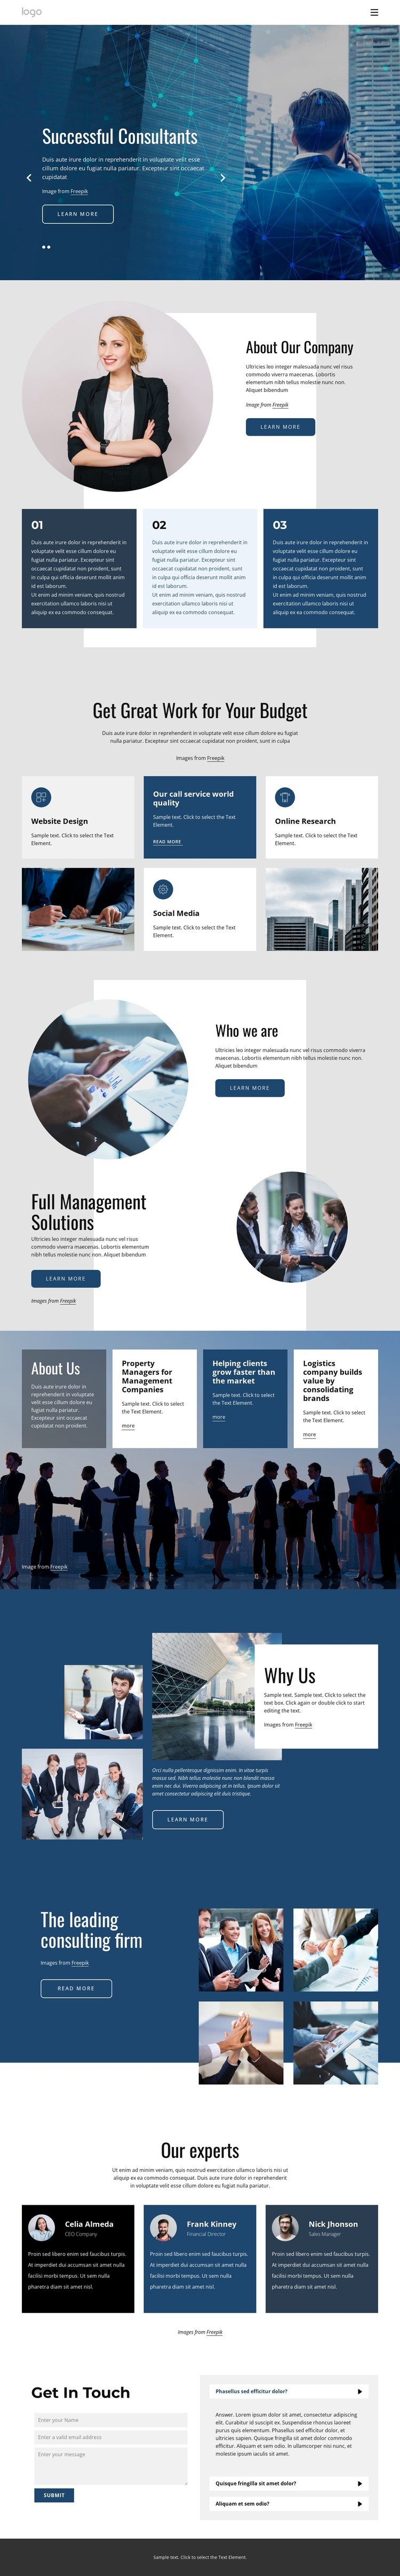 We offer tailored consulting services Webflow Template Alternative